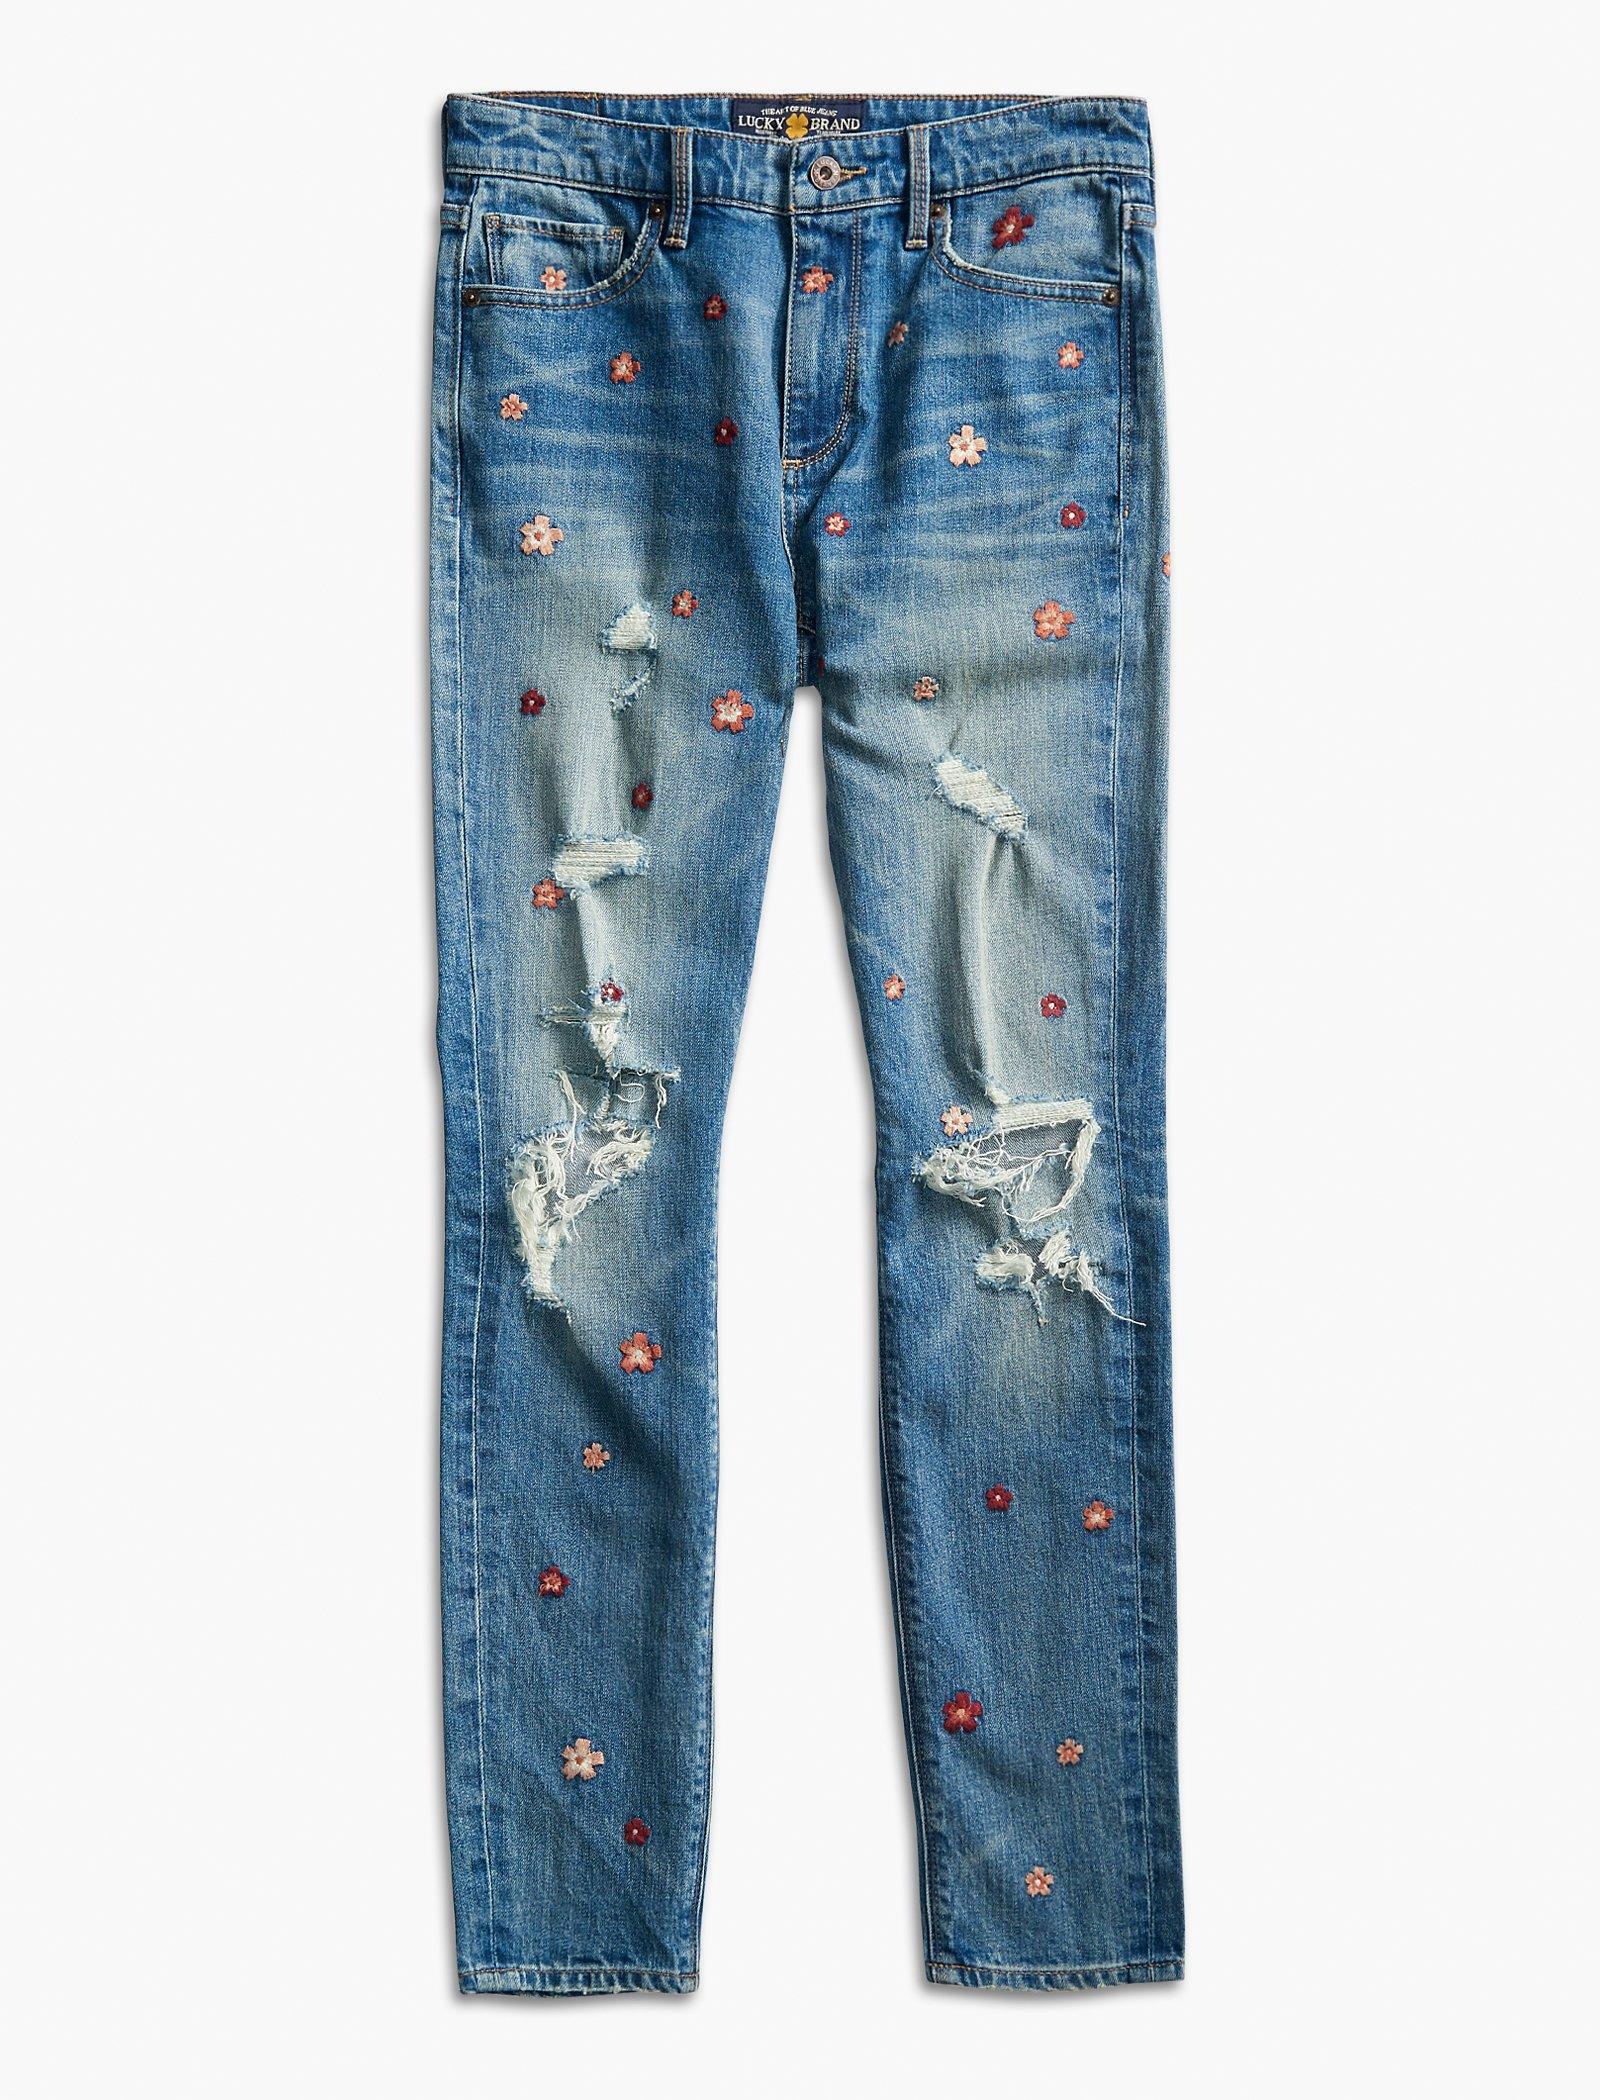 lucky brand floral jeans